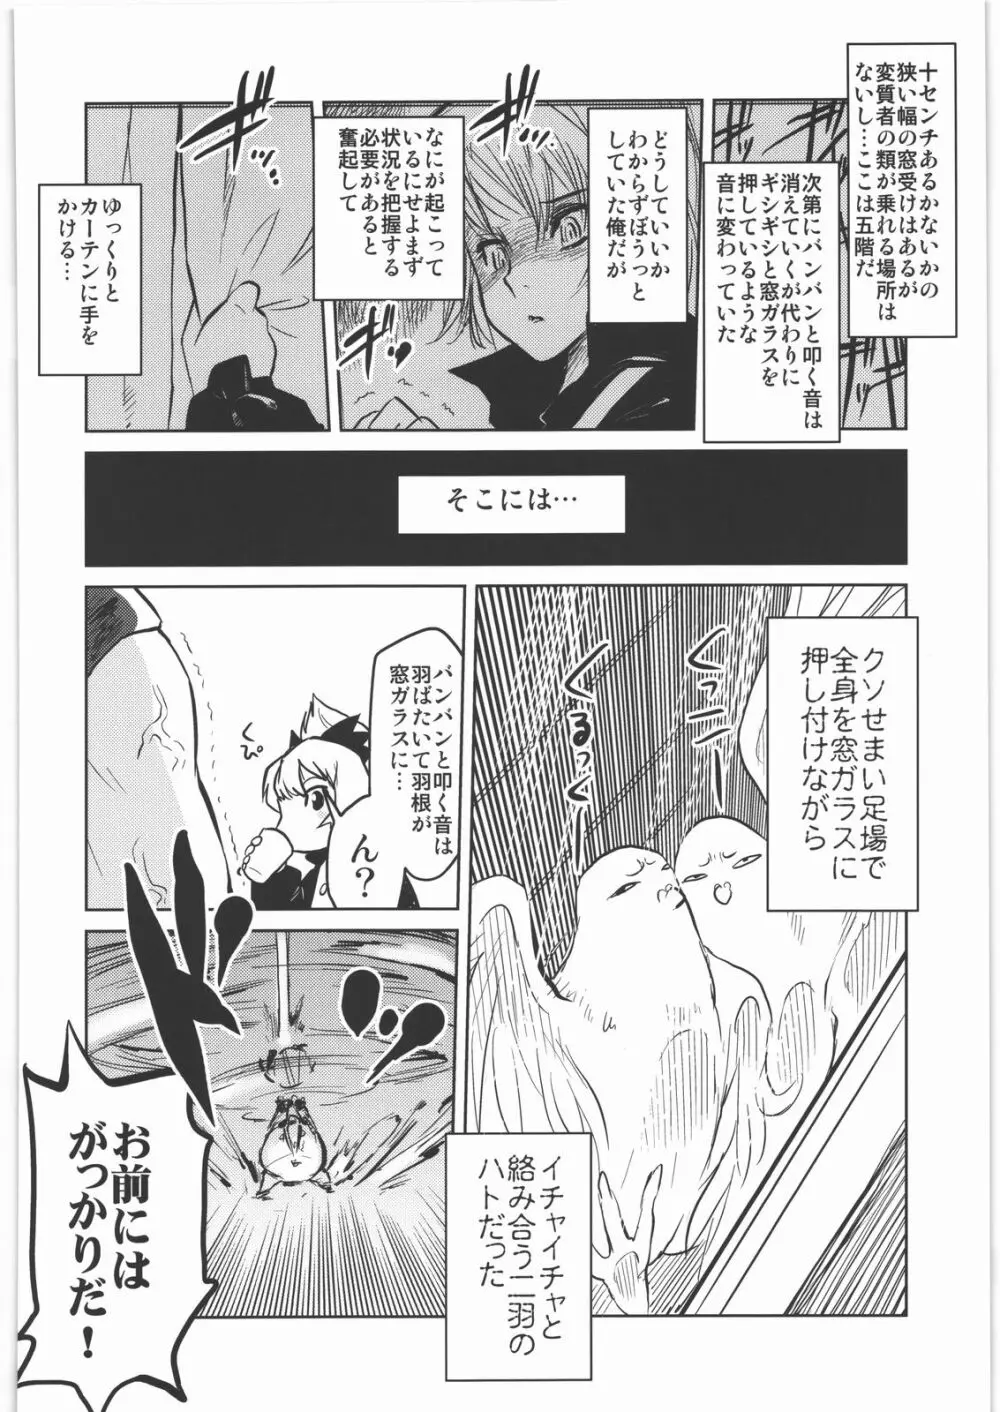 甲冑通信 弐之號 Page.45